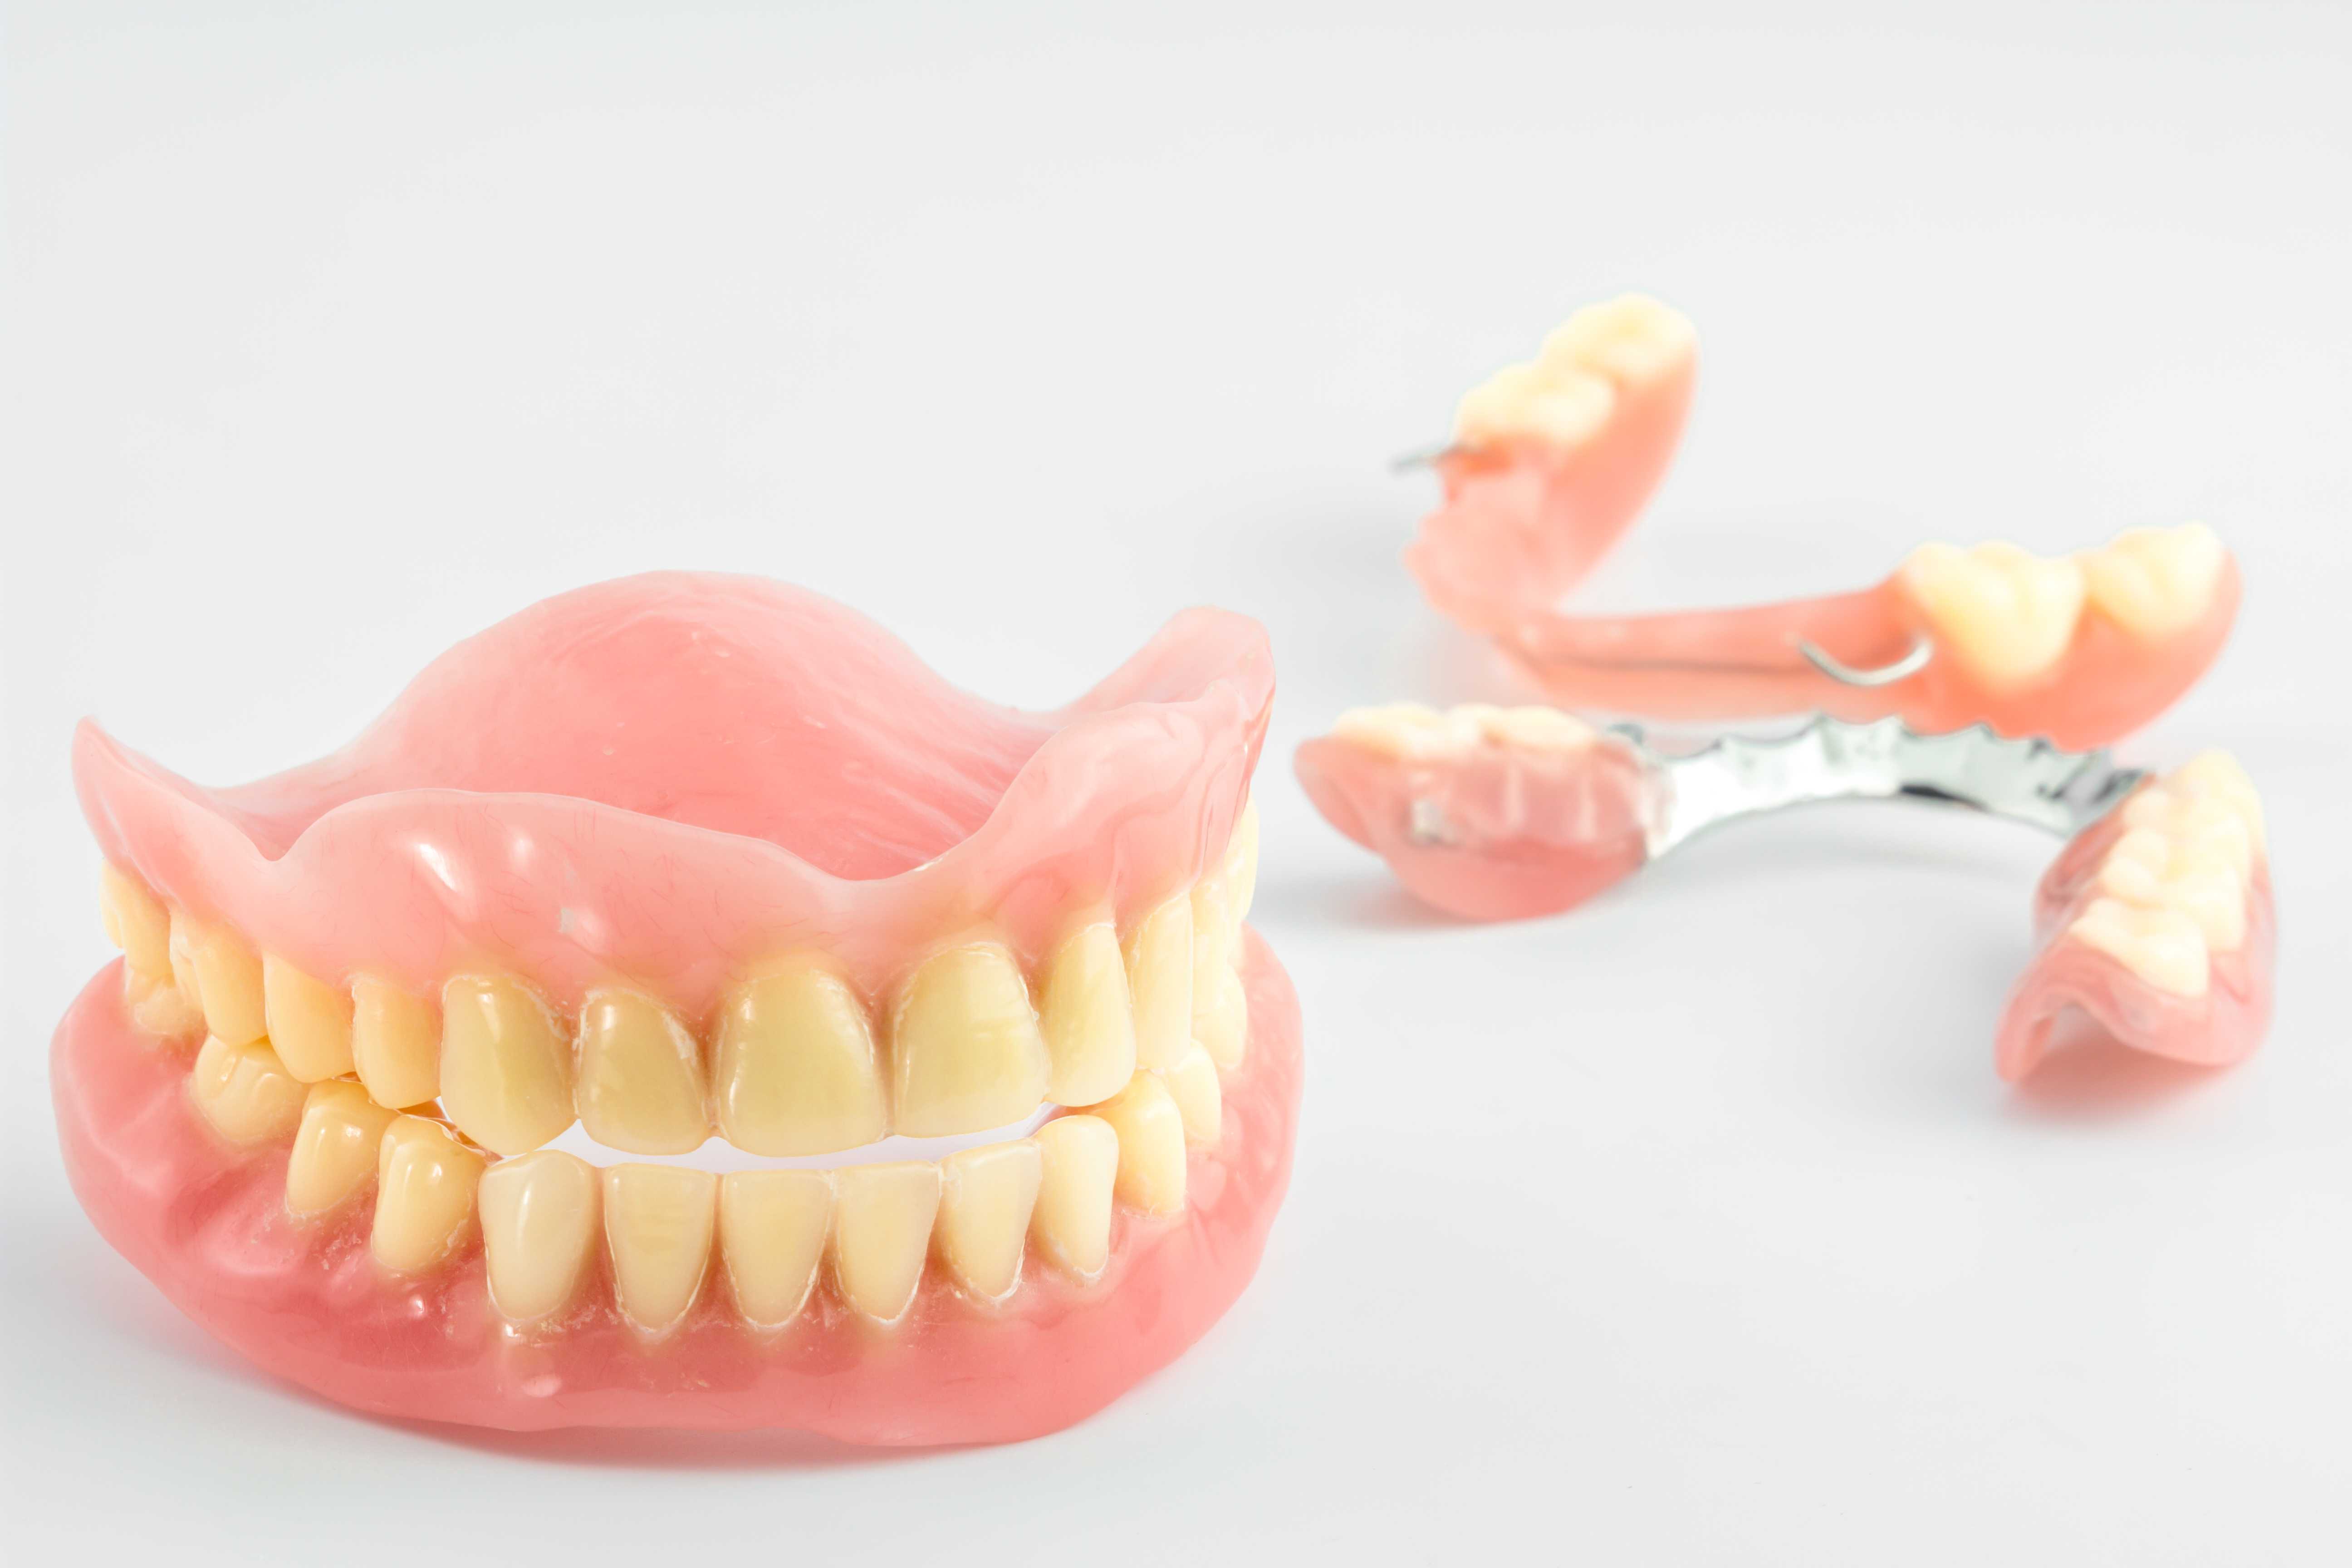 How to beat common denture problems and get back to enjoying life